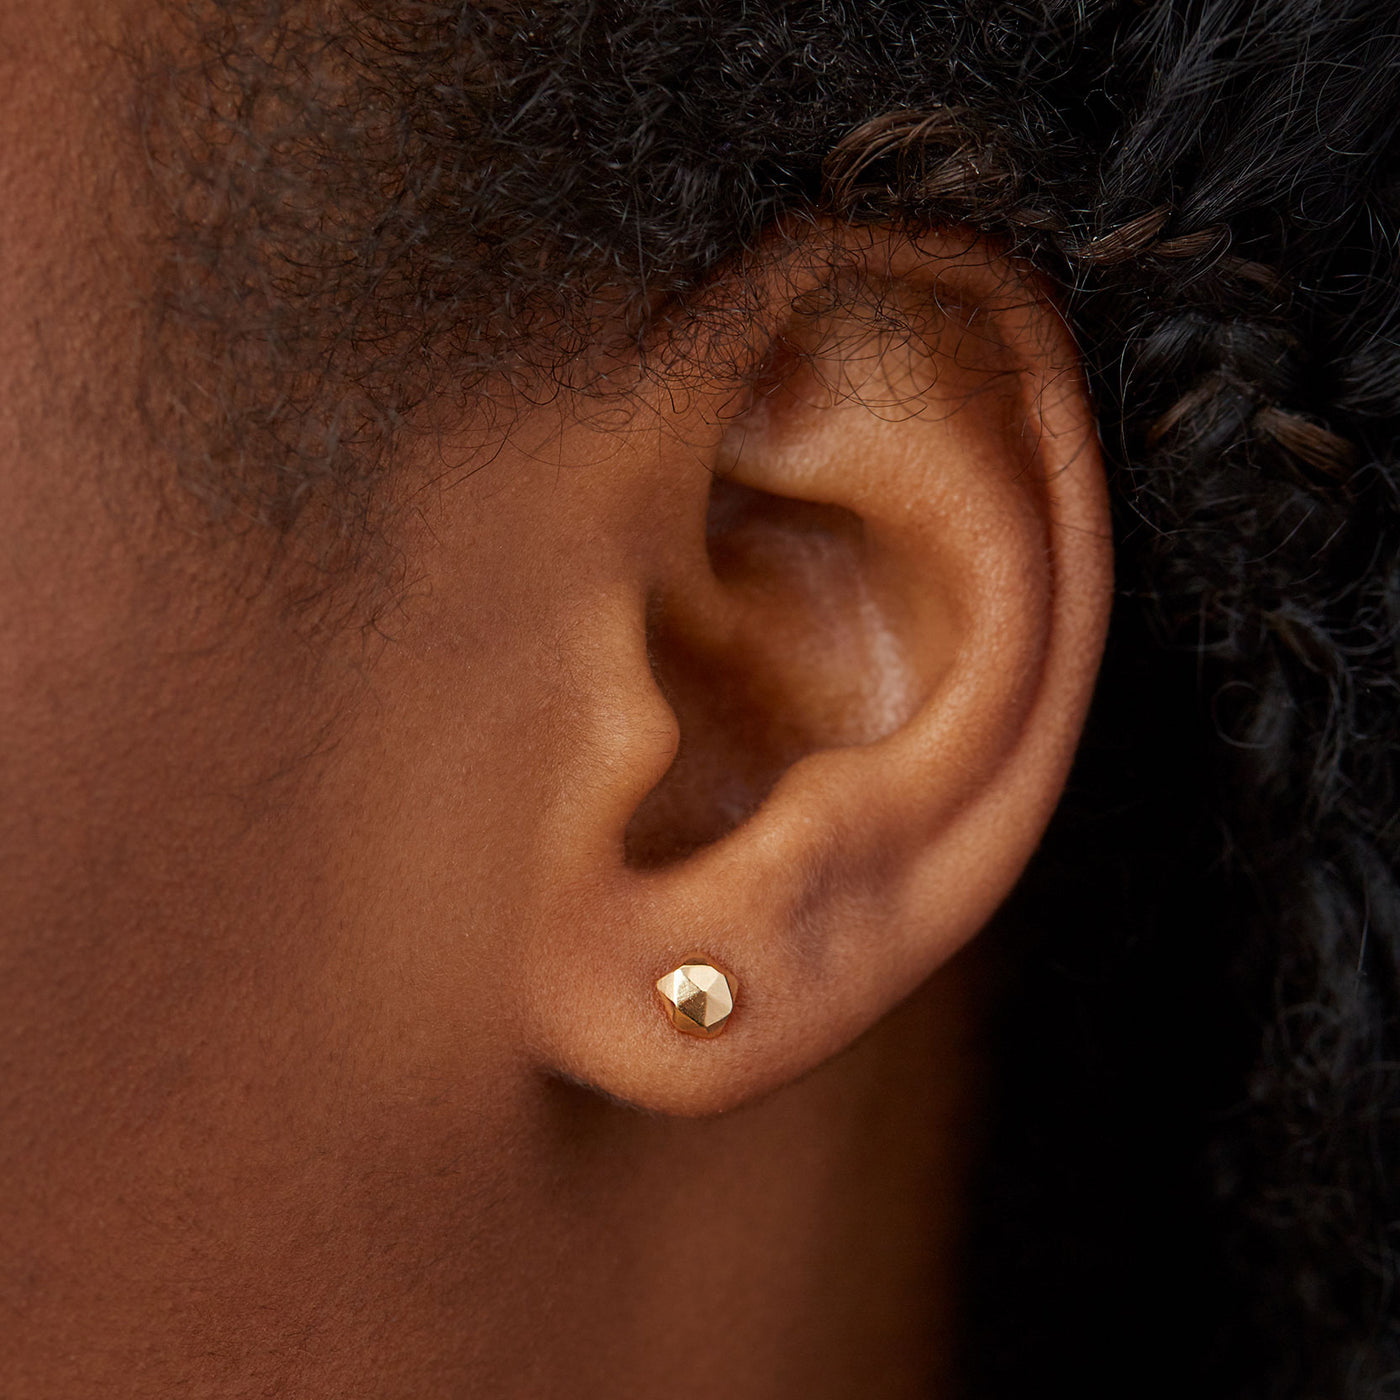 14k yellow gold geometric faceted stud earrings in the micro size on an ear by Corey Egan